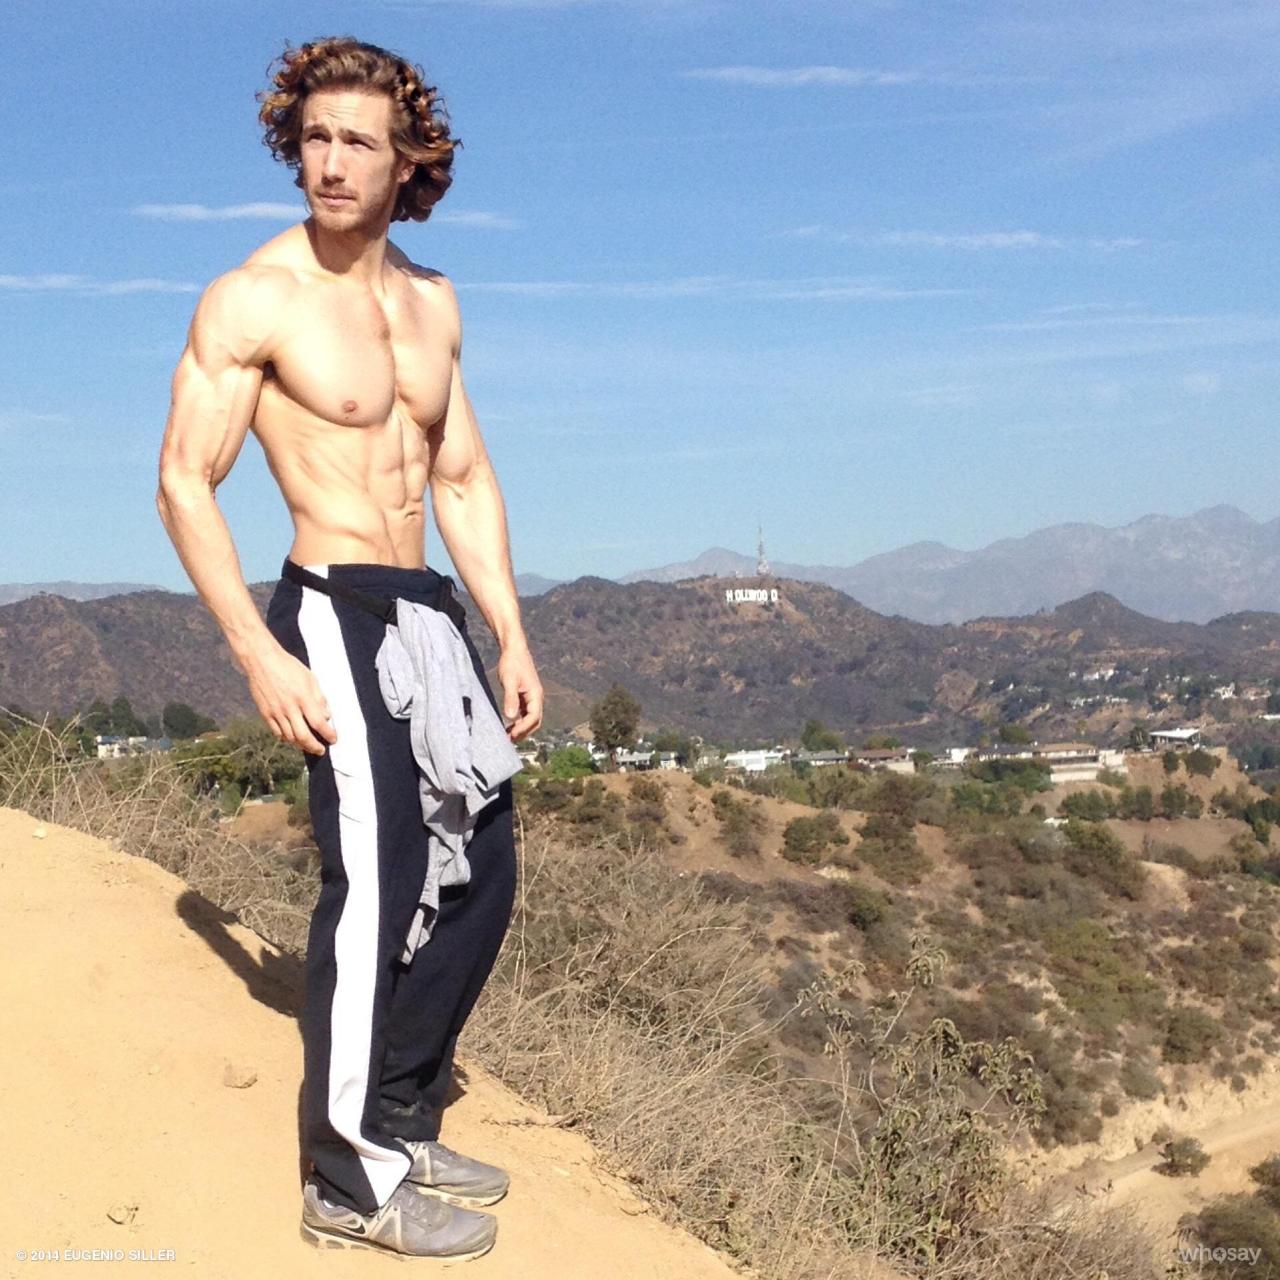 Eugenio siller is gay